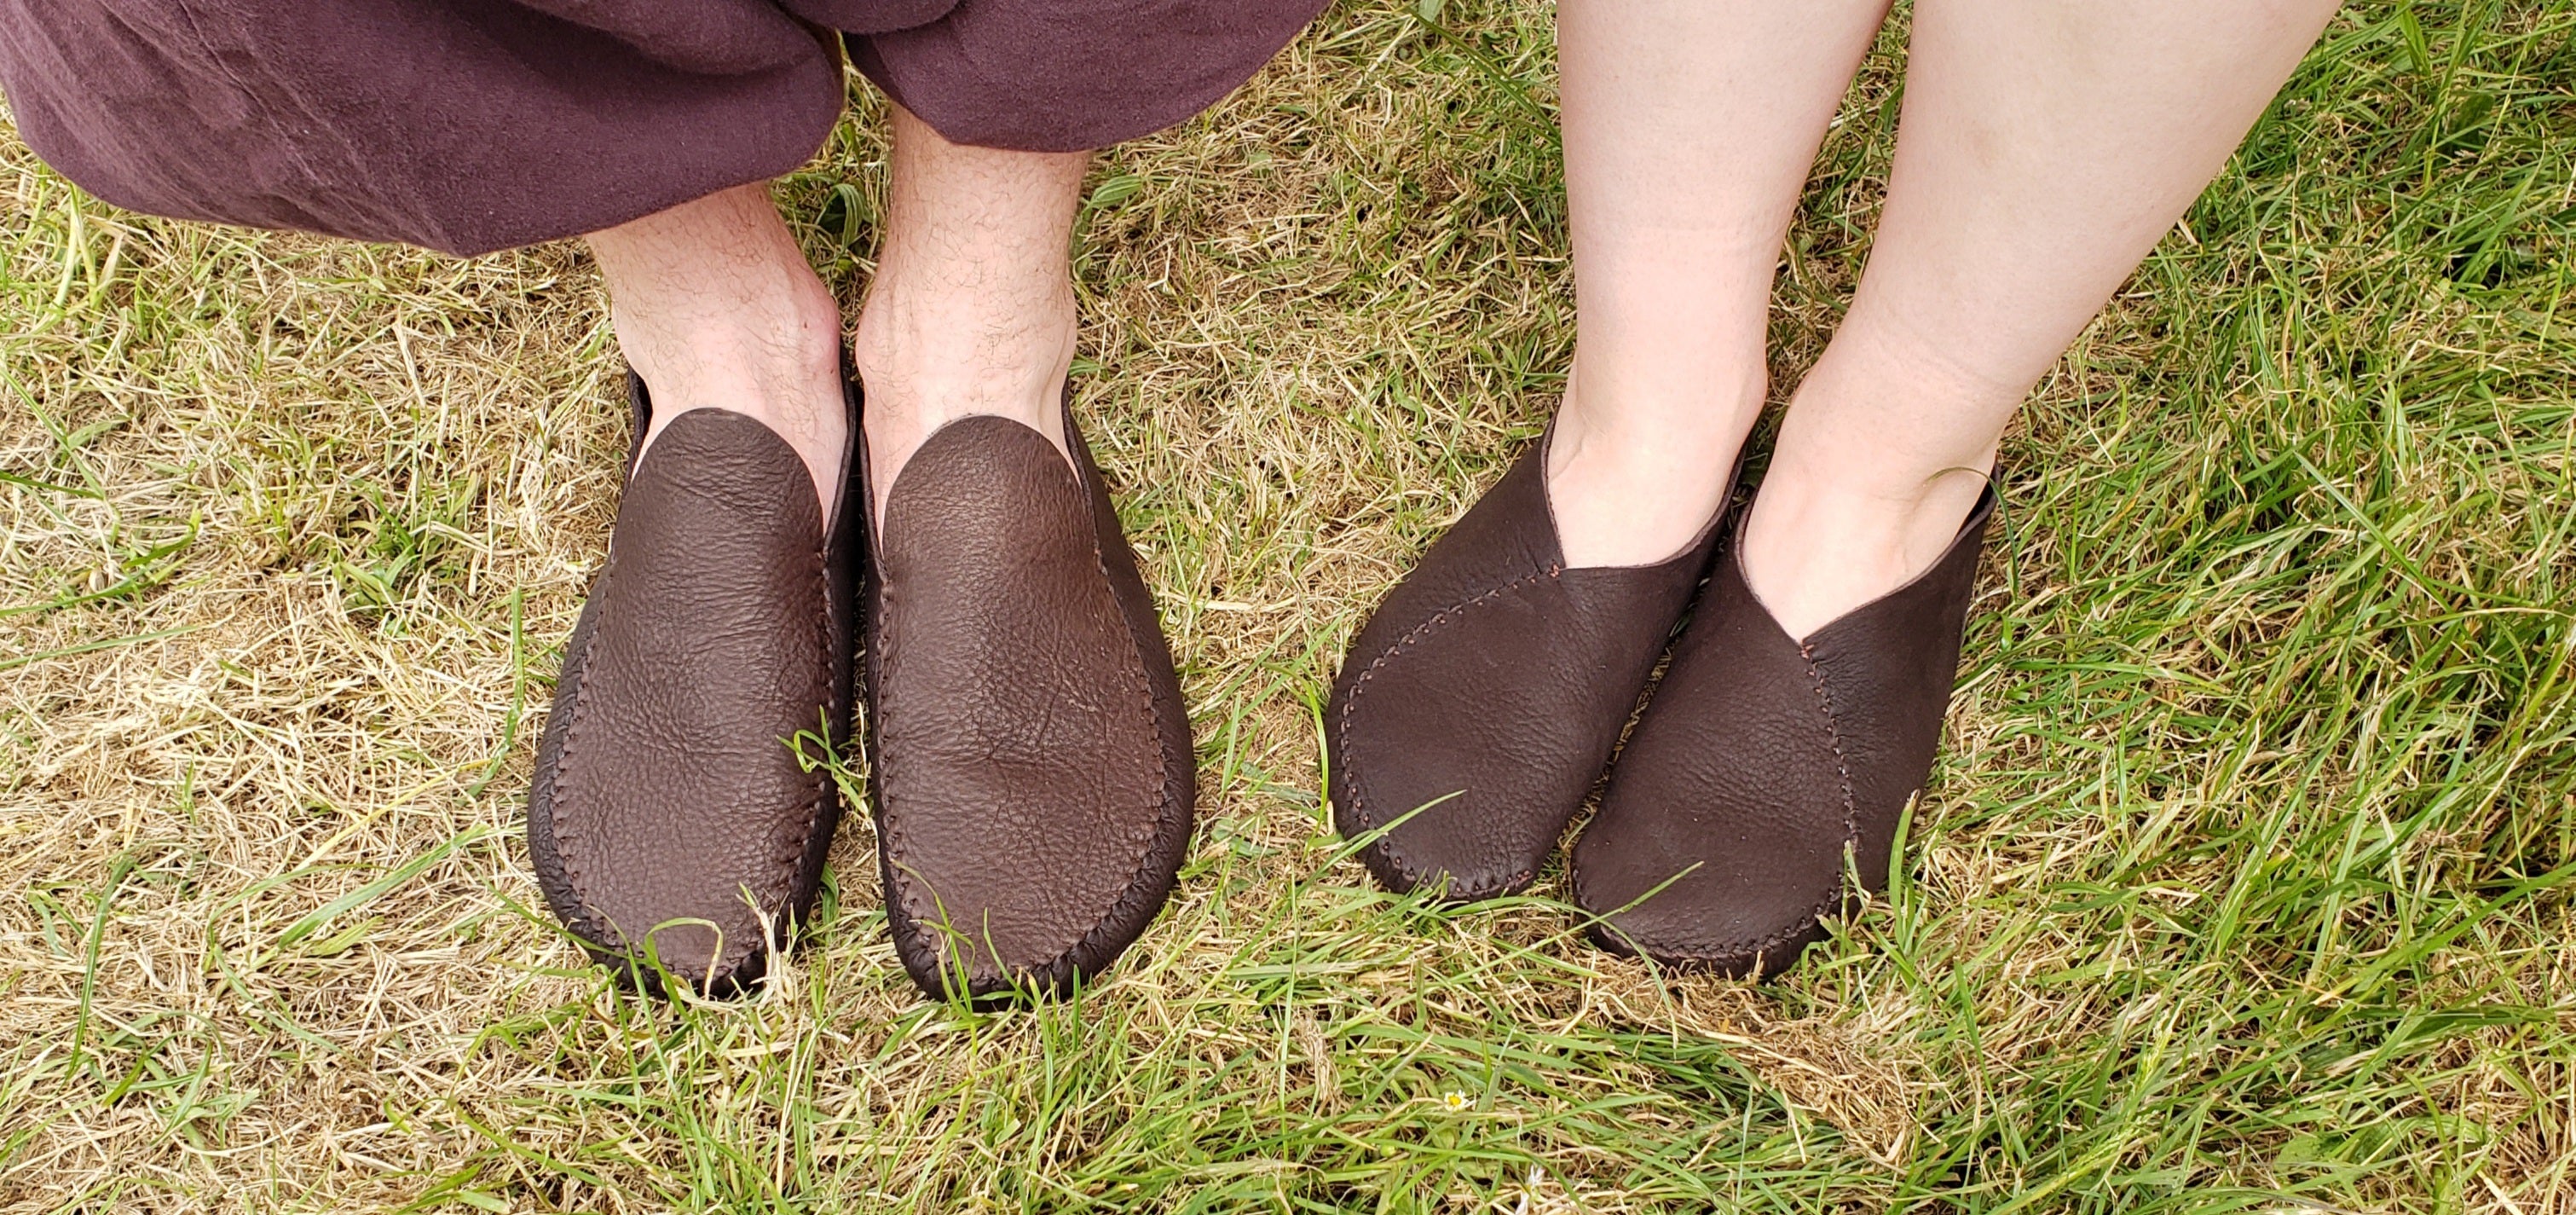 Runners Moccasins / Custom-Made Barefoot Shoes